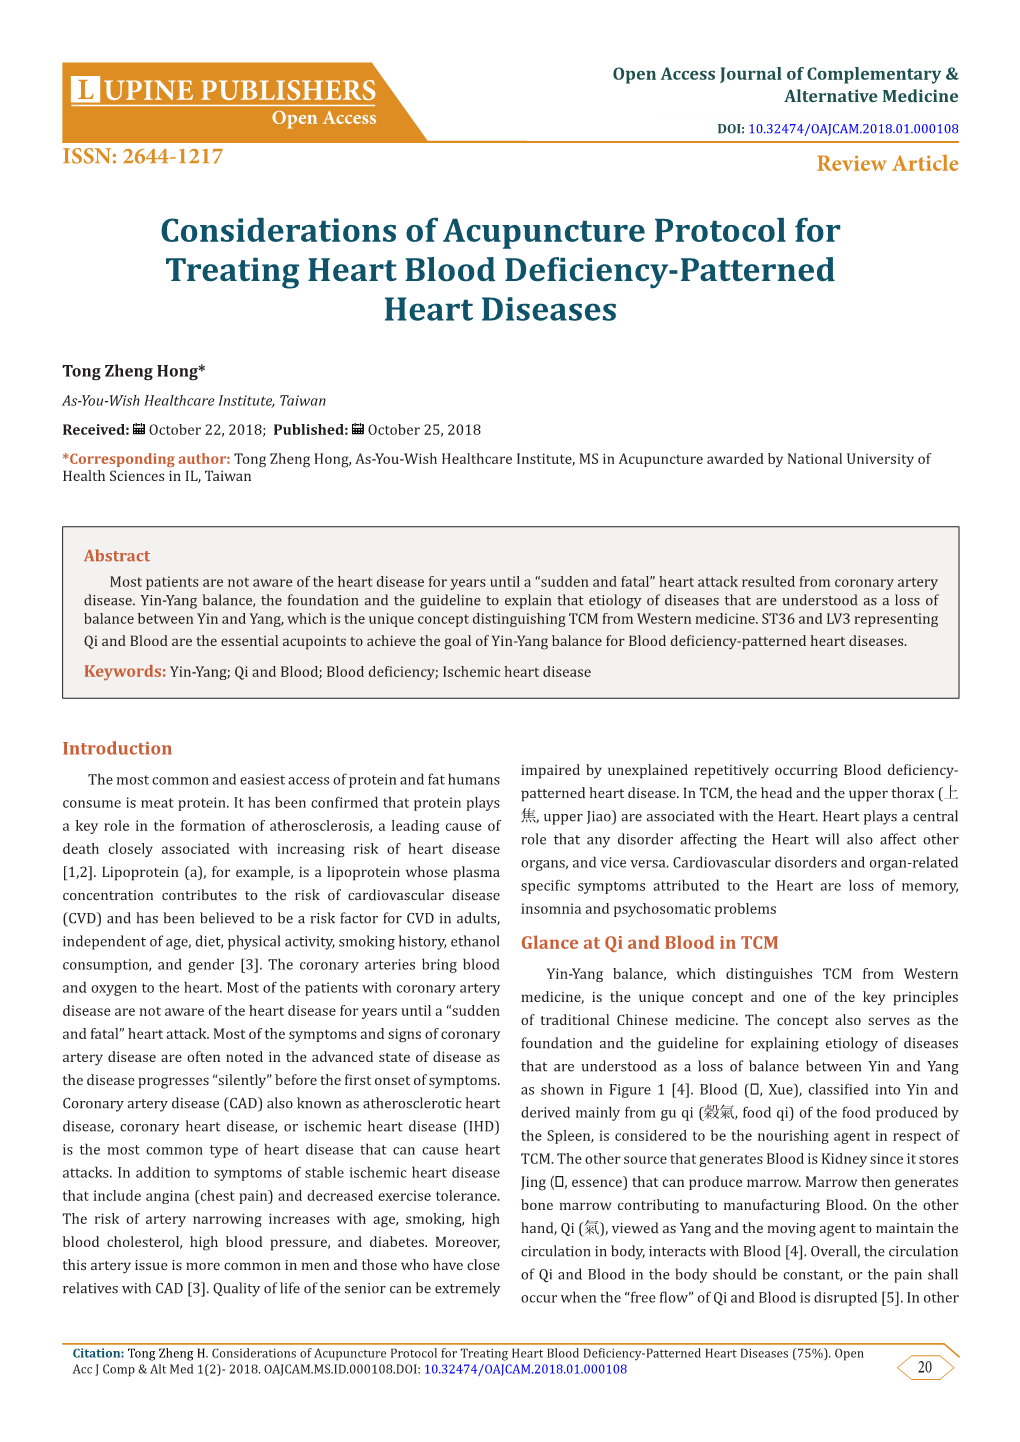 Considerations of Acupuncture Protocol for Treating Heart Blood Deficiency-Patterned Heart Diseases